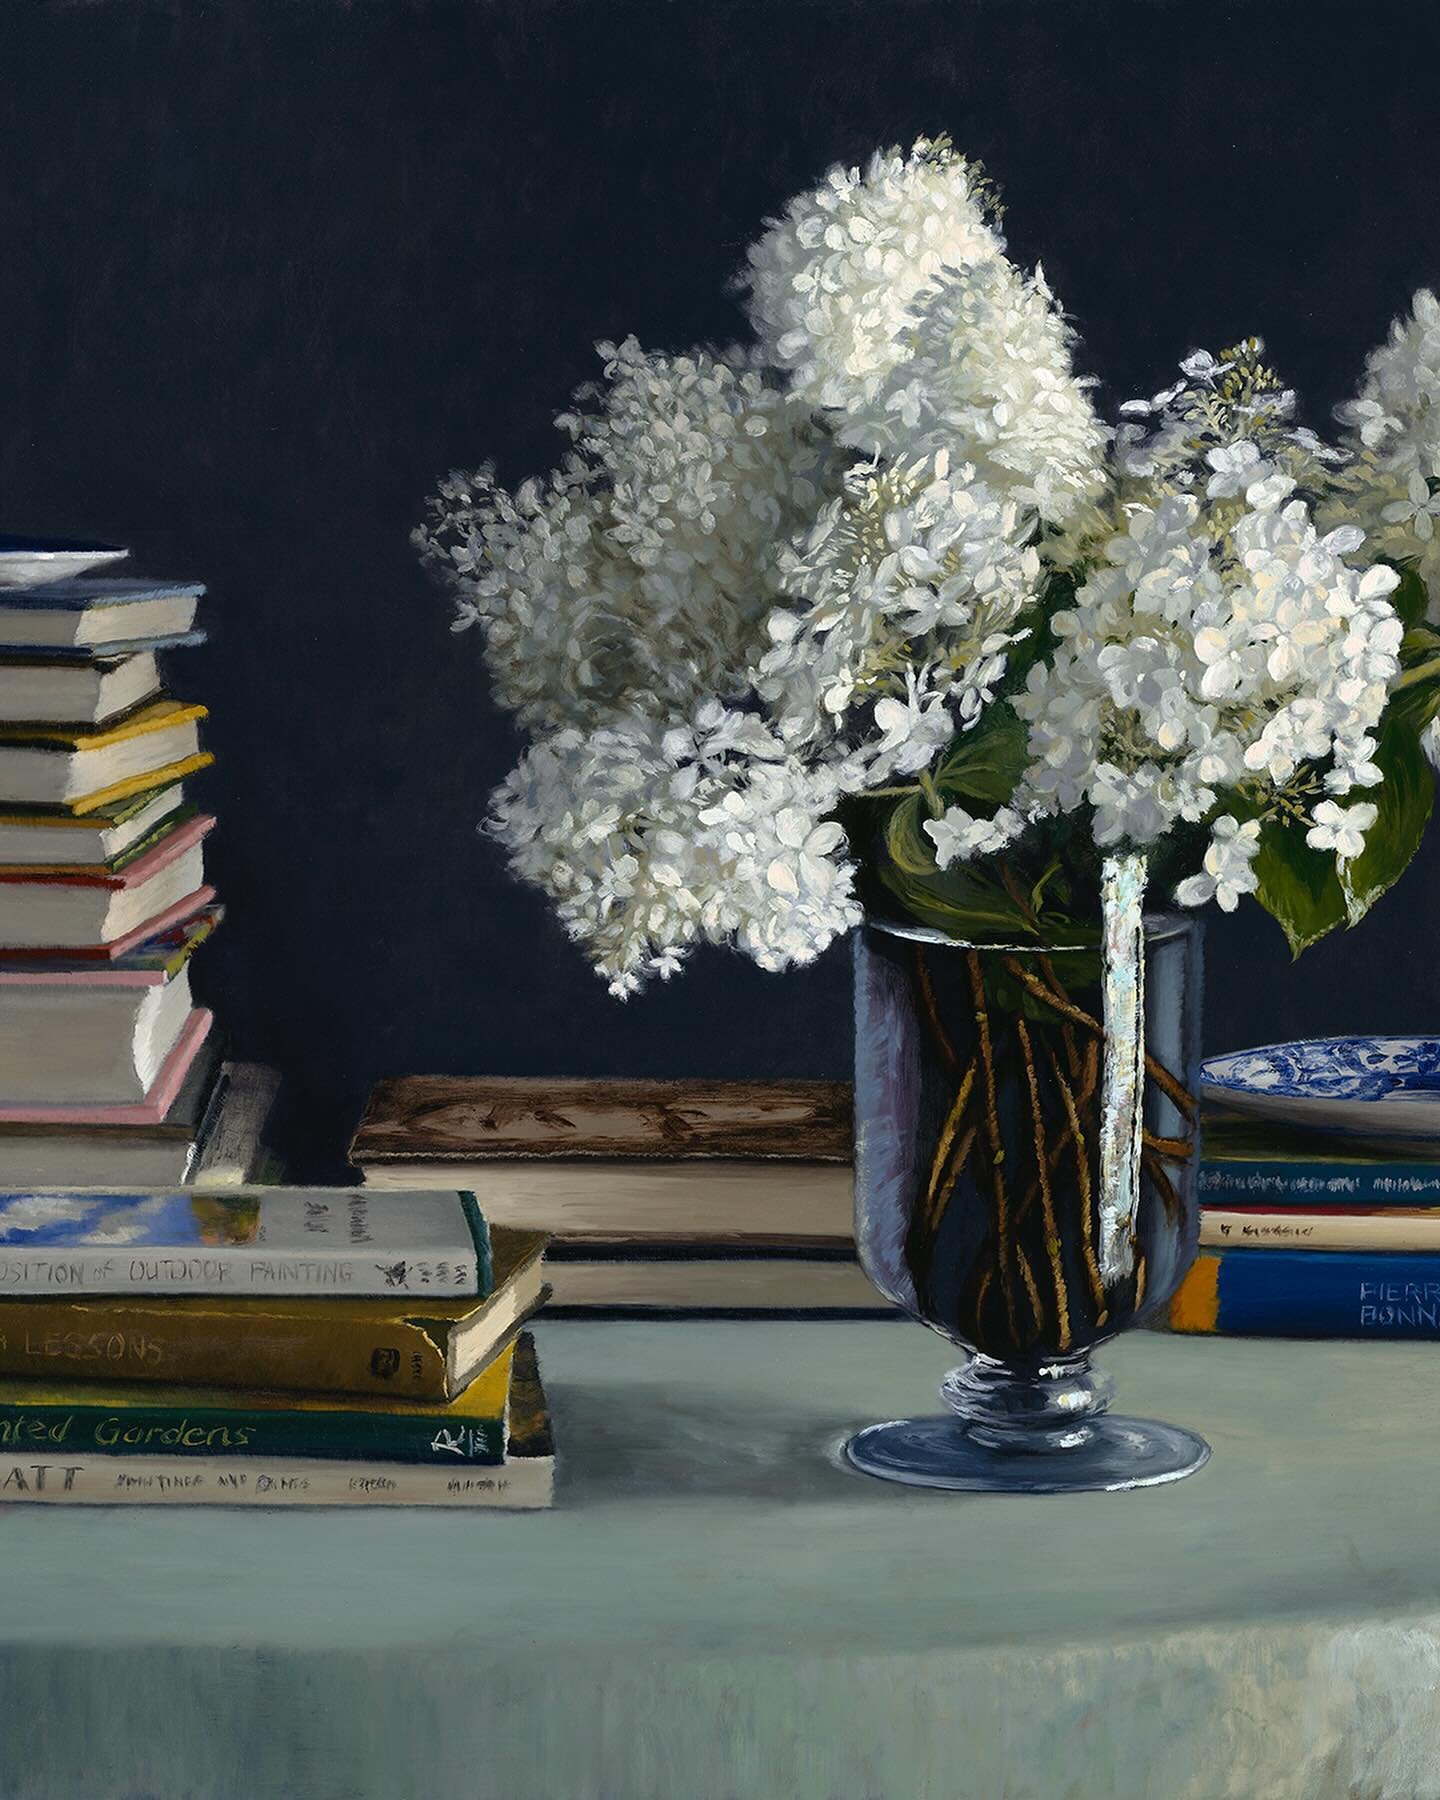 This painting is one of the ones that sums up MEMORIES in BLOOM for me. The quiet light of a weekend afternoon raking across a bouquet of hydrangeas, maybe spent with a good book, an intimate moment with oneself and celebrating beauty.⁠
⁠
&ldquo;Summ